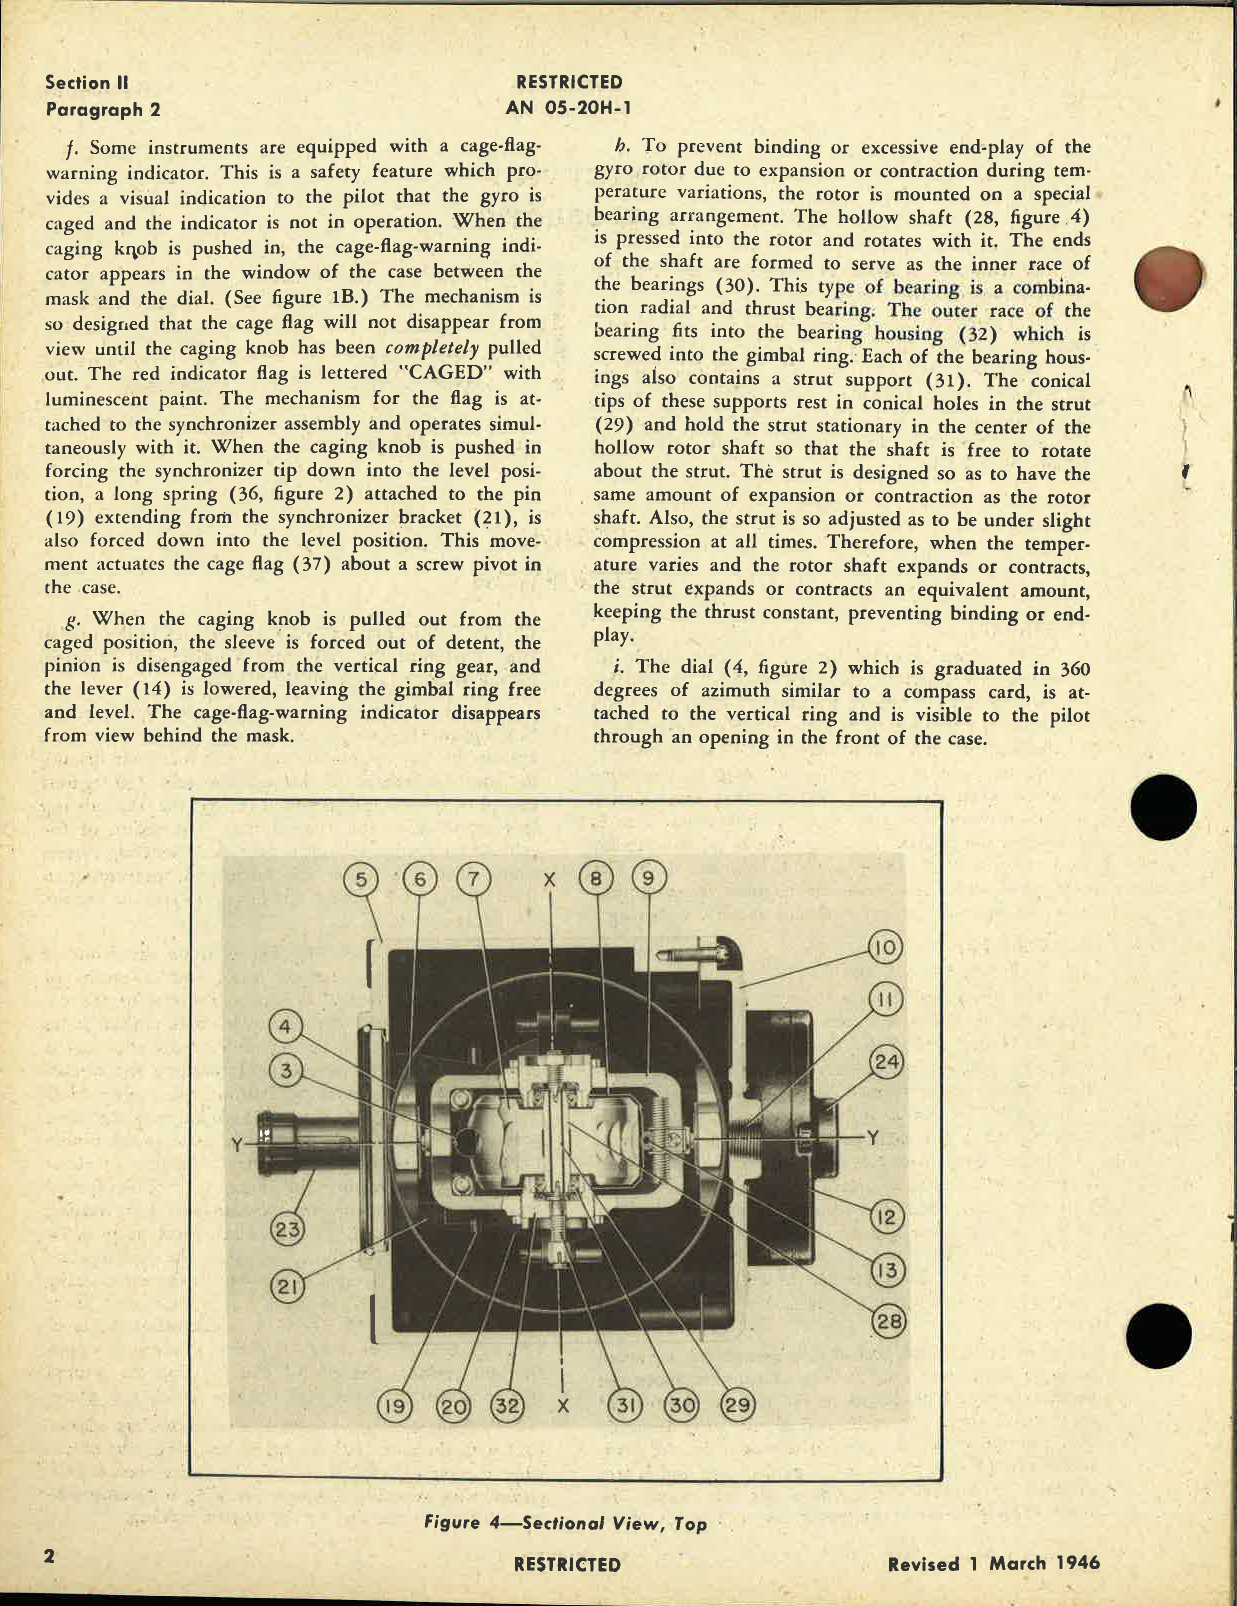 Sample page 6 from AirCorps Library document: Operation and Service Instructions for Directional Gyro Indicators